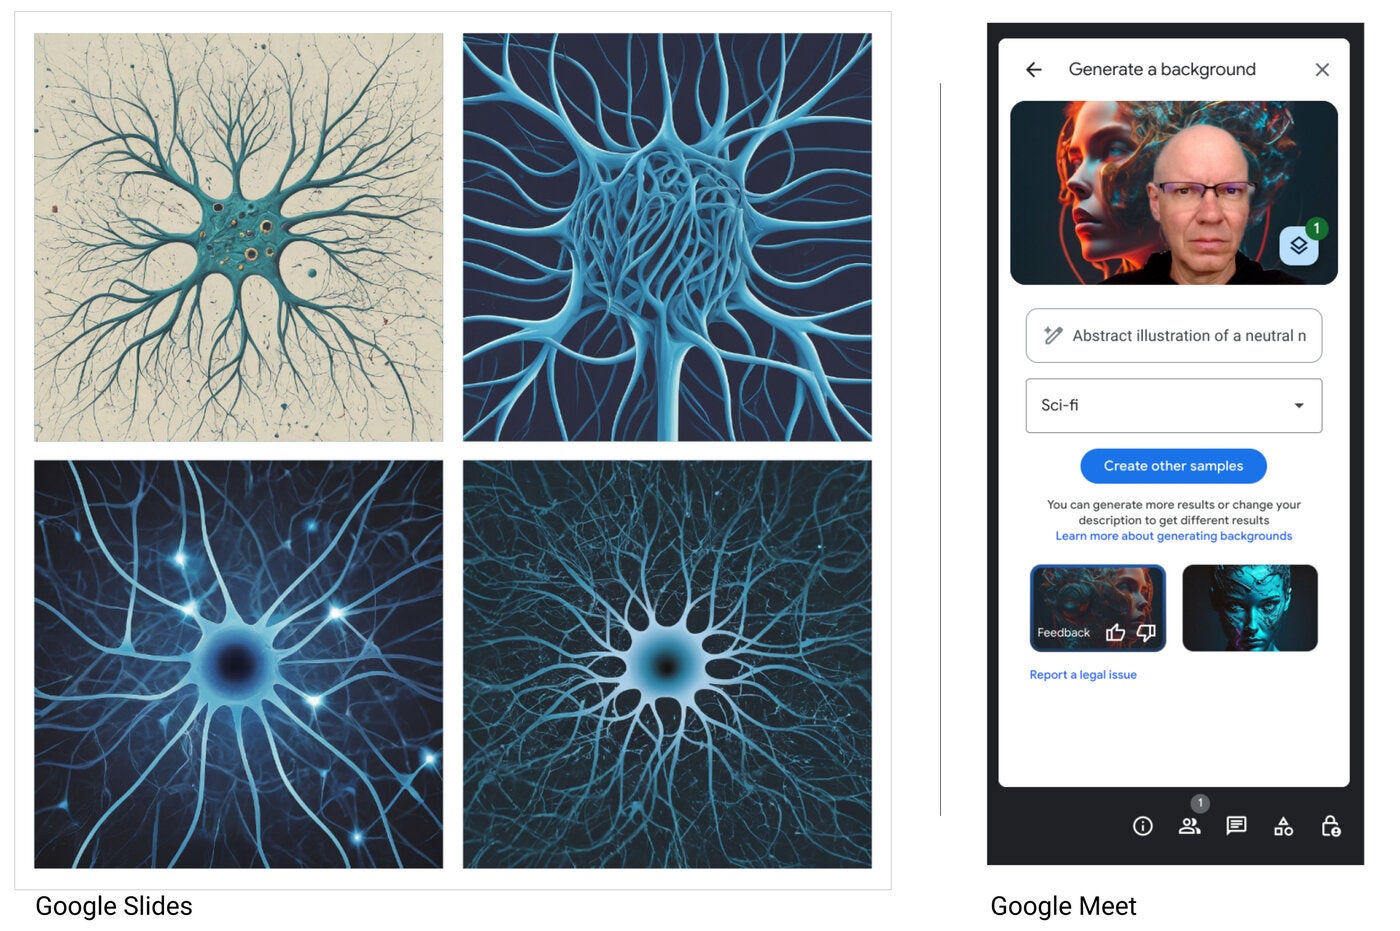 Images of abstract illustrations generated by Gemini in Google Slides (left) and Google Meet (right).